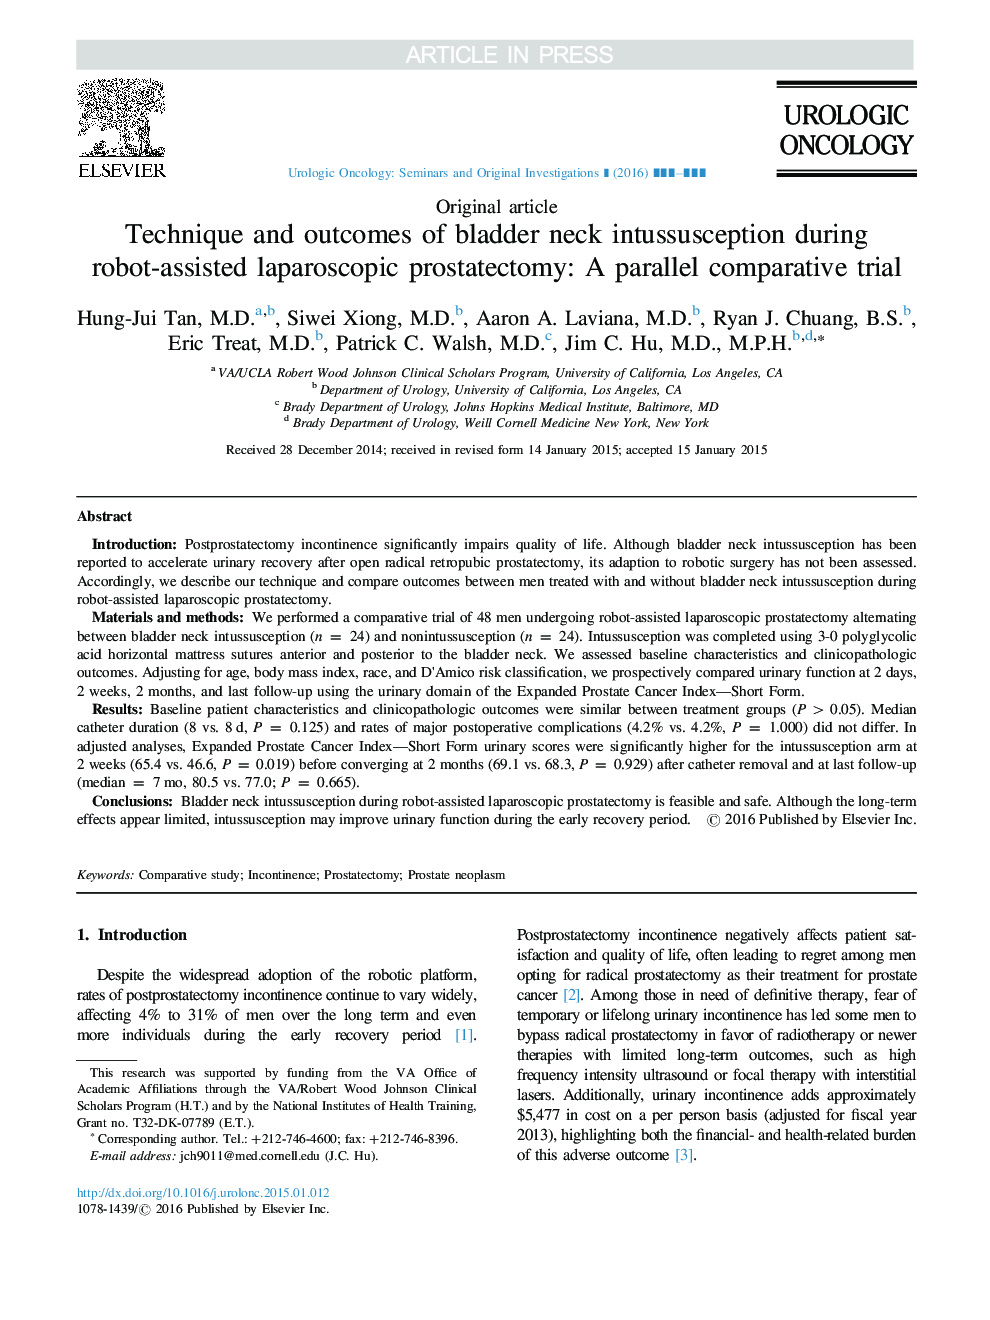 Technique and outcomes of bladder neck intussusception during robot-assisted laparoscopic prostatectomy: A parallel comparative trial